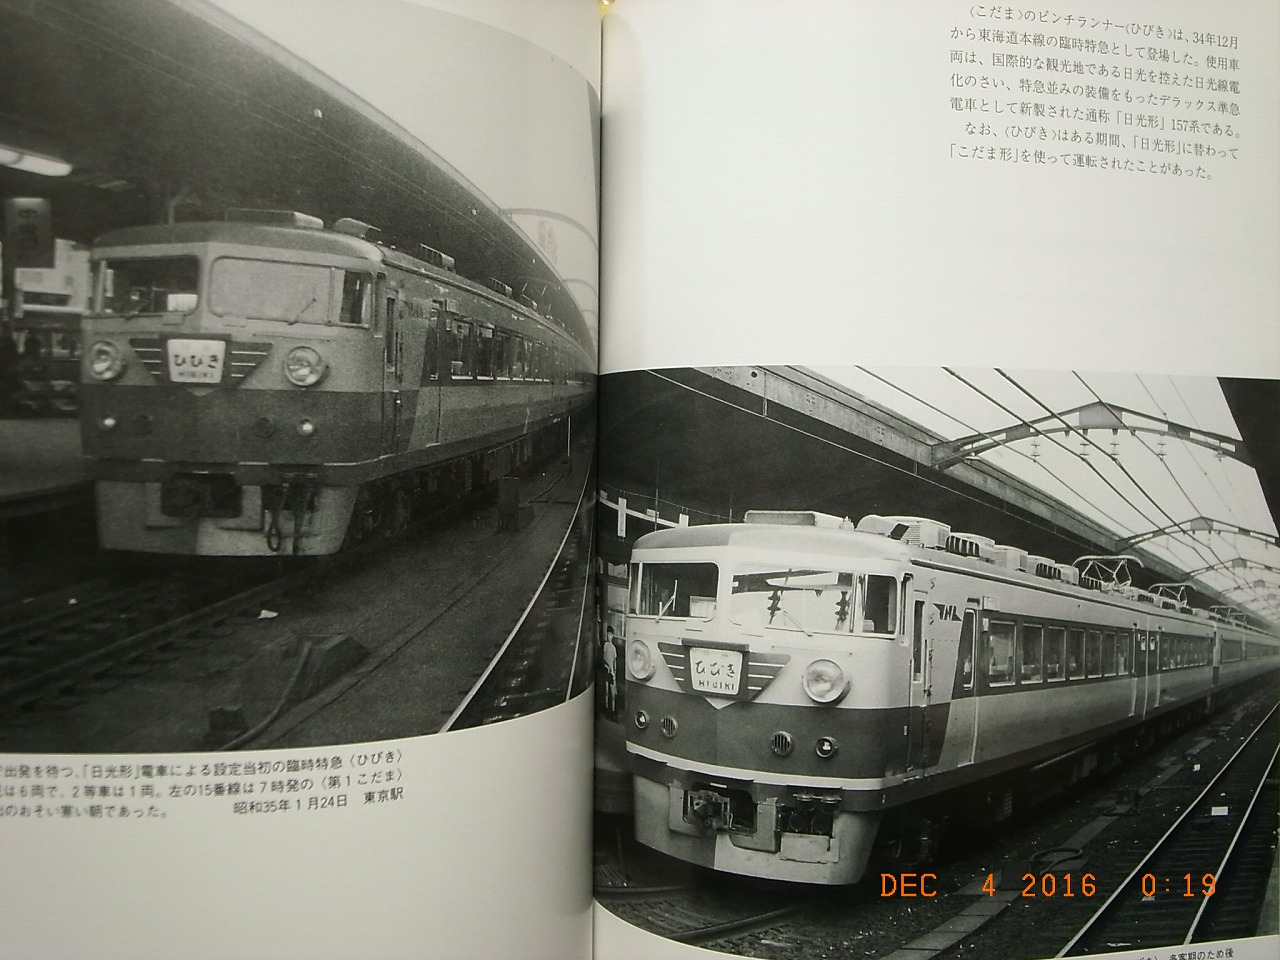 JAPANESE NATIONAL RAILWAY ELECTRIC TRAINS IN 60S VOL.1, PICTORIAL 